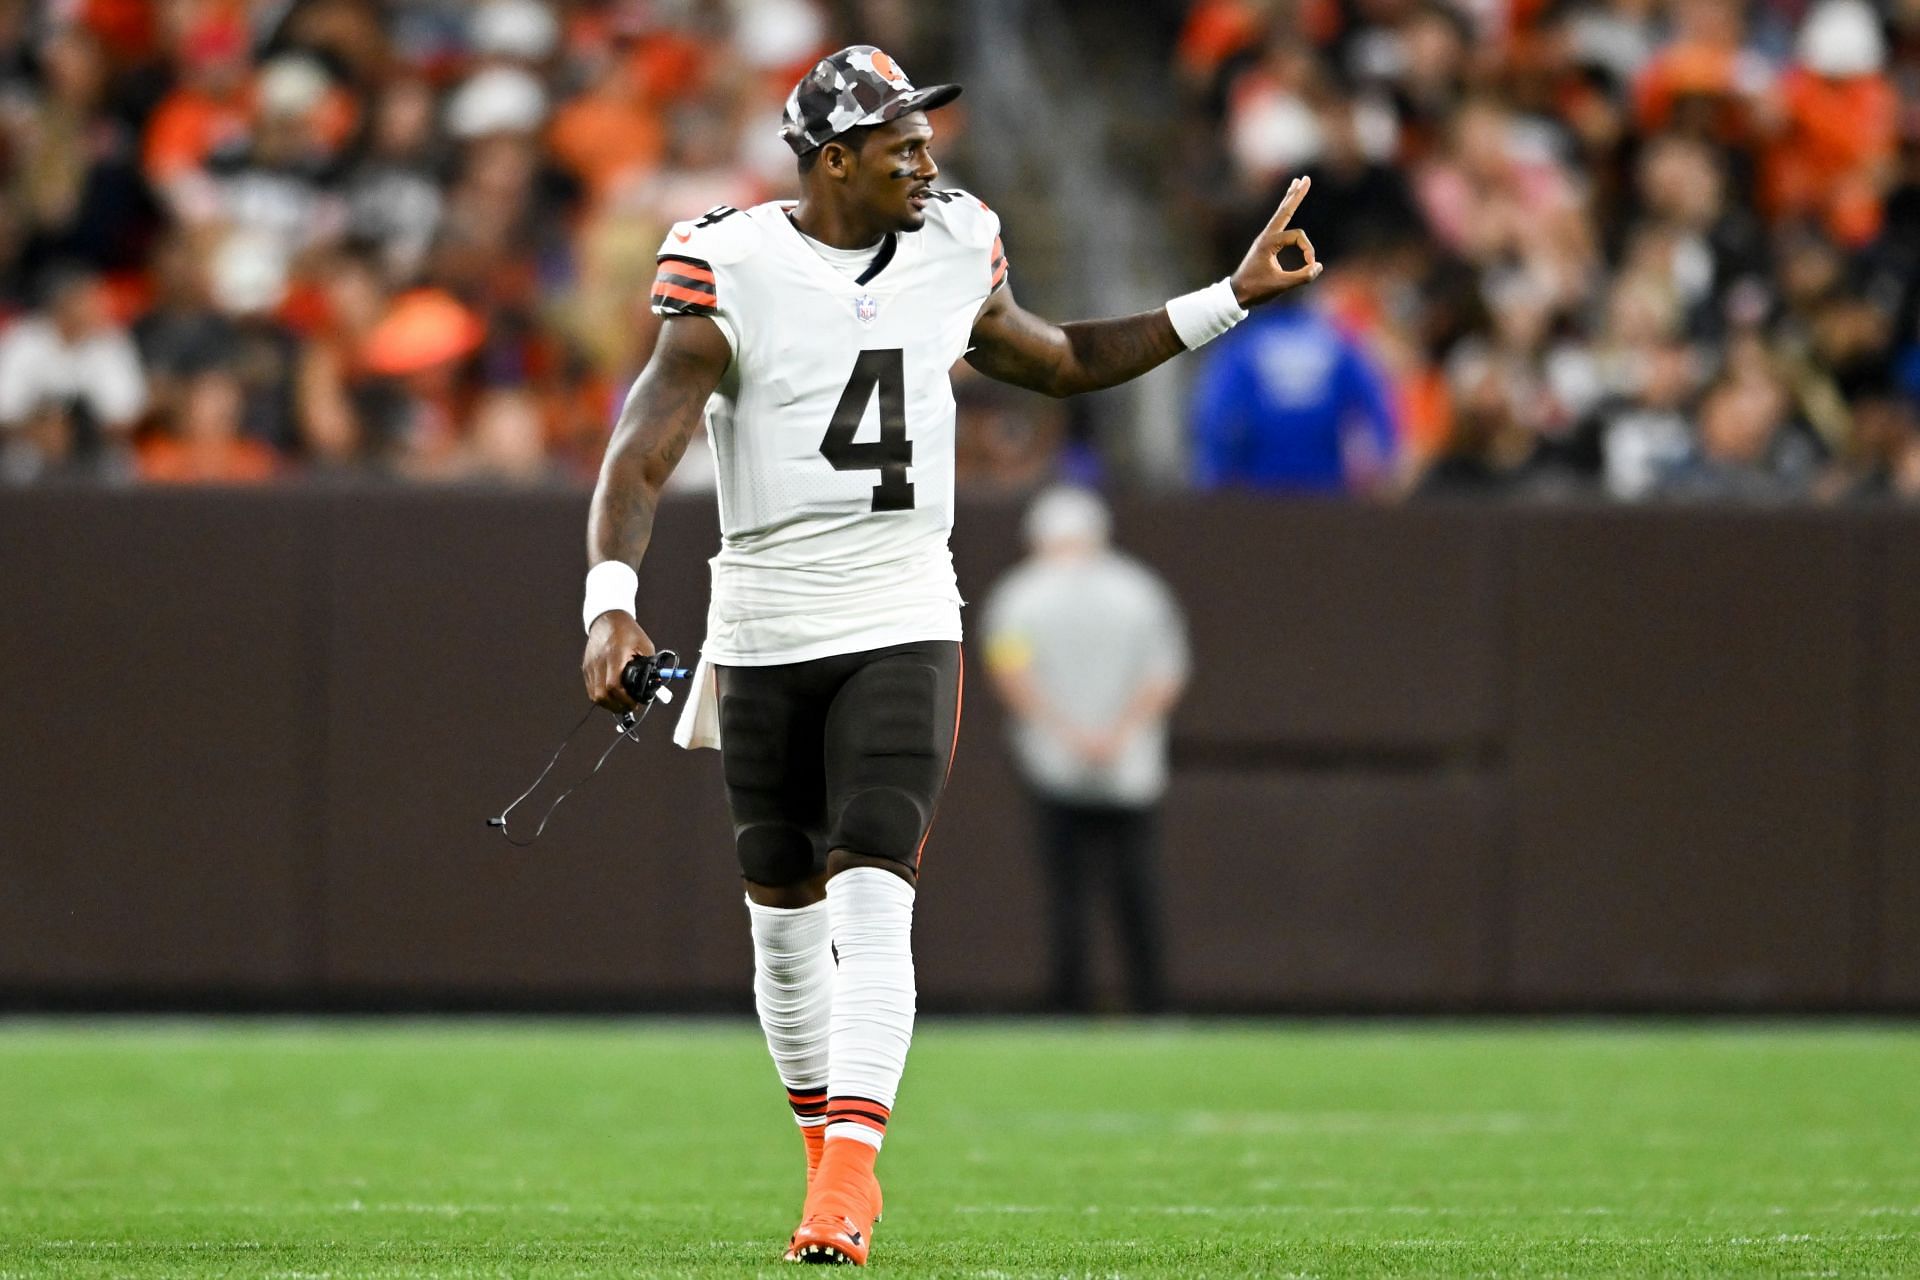 Watson plays 1 drive in Browns 2nd preseason game; Game delayed 68 minutes  by storms – WHIO TV 7 and WHIO Radio